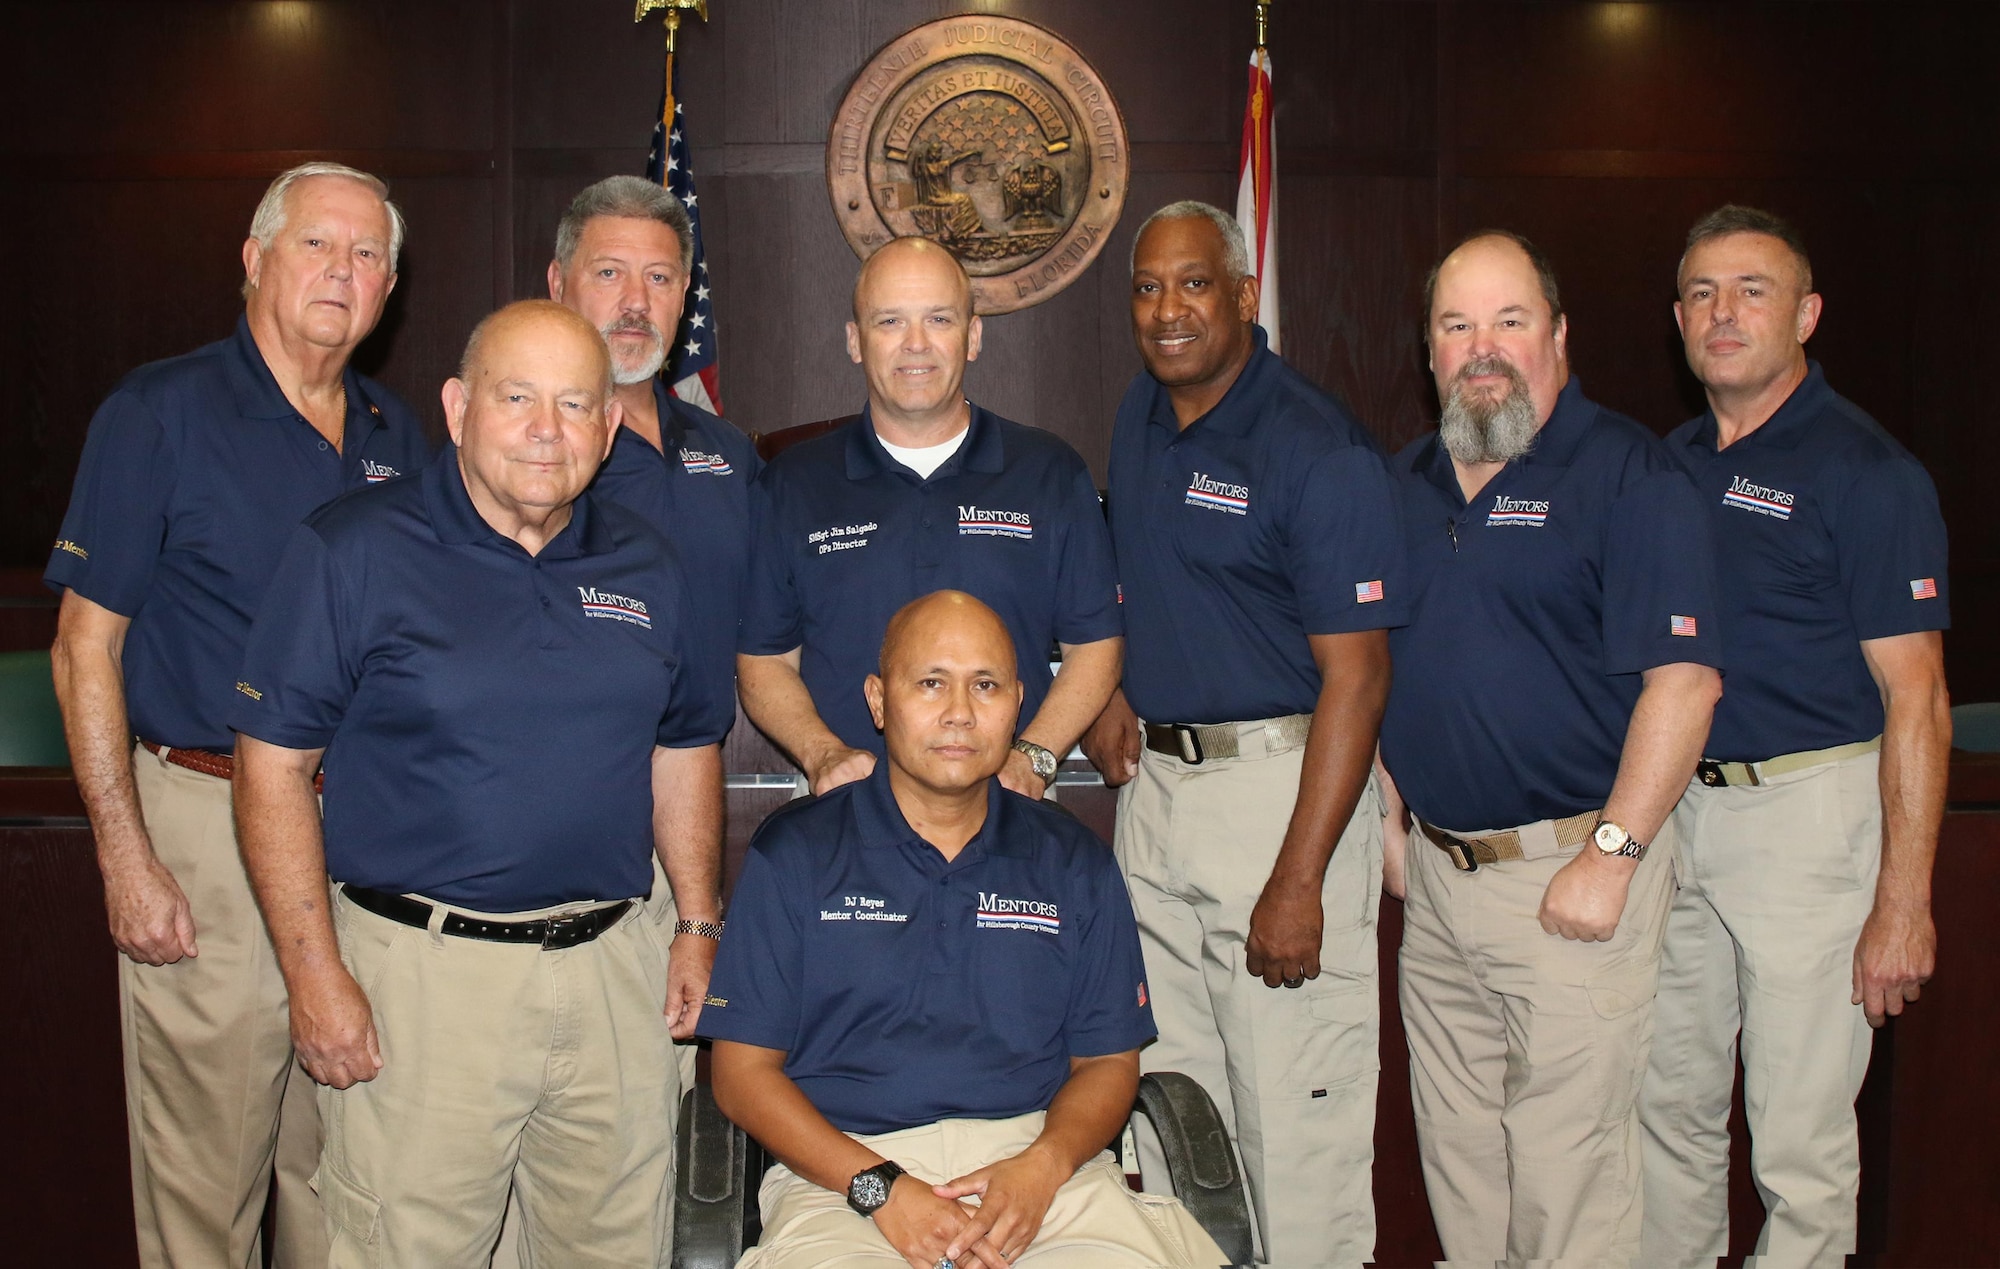 Senior Master Sgt. James Salgado (center, standing) and retired U.S. Army Col. D.J. Reyes (center, seated) with their team of Veterans Treatment Court mentors.